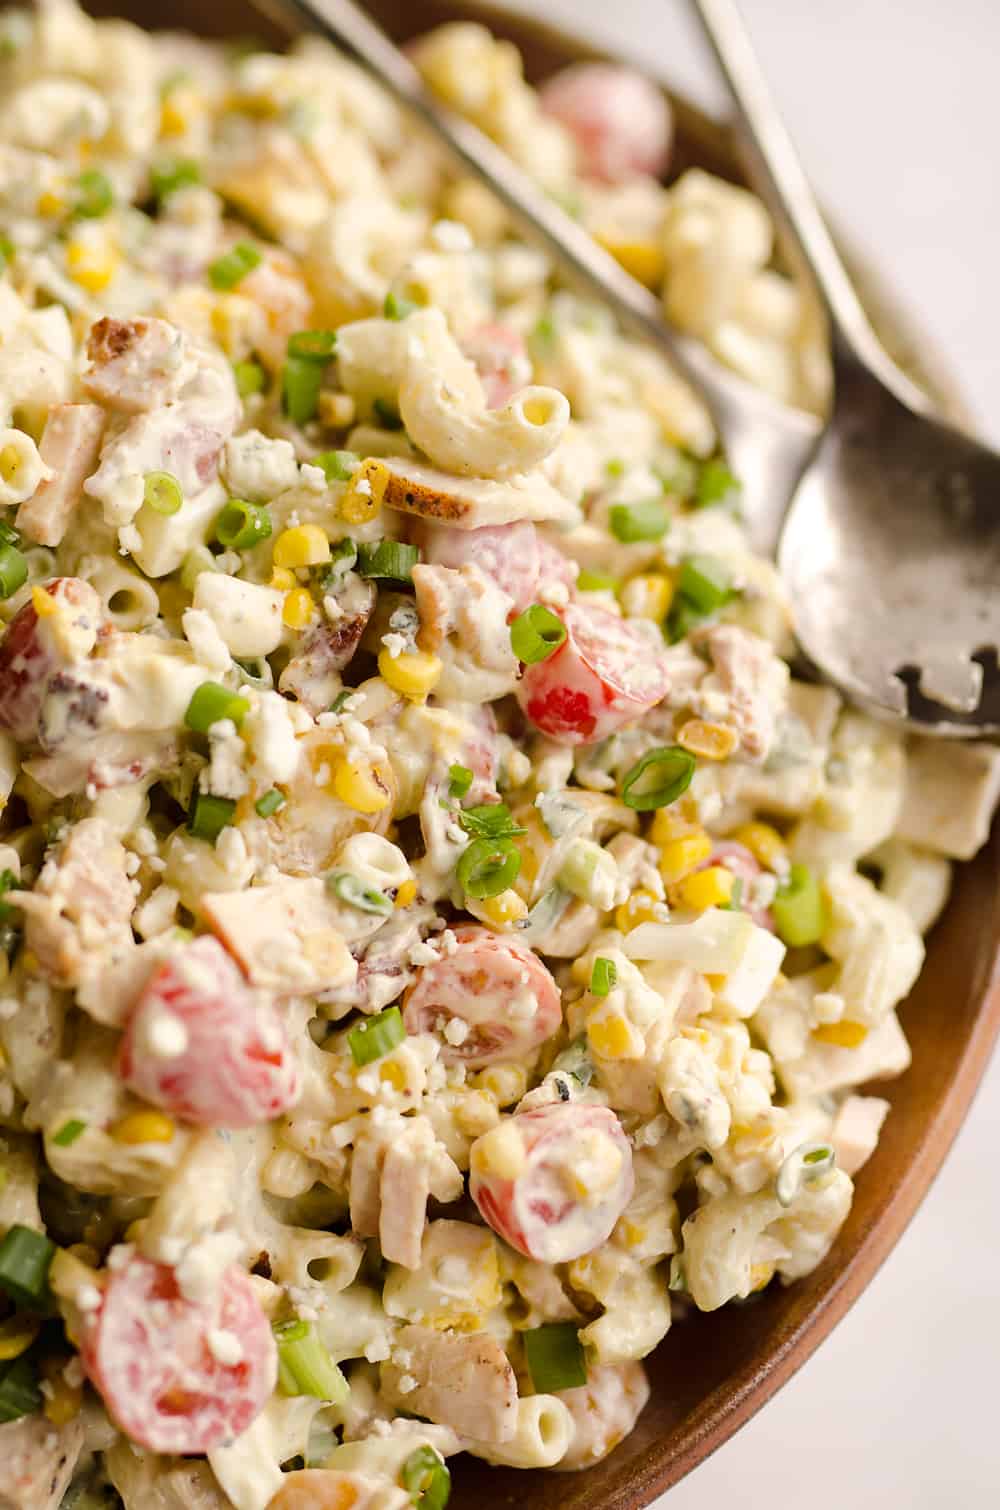 Creamy Turkey Cobb Pasta Salad is a fresh and flavorful side dish perfect for your next picnic or potluck. Pasta, Jennie-O turkey breast, bacon, bleu cheese and veggies are tossed in a zesty avocado sauce for a salad bursting with flavor and crunch. 